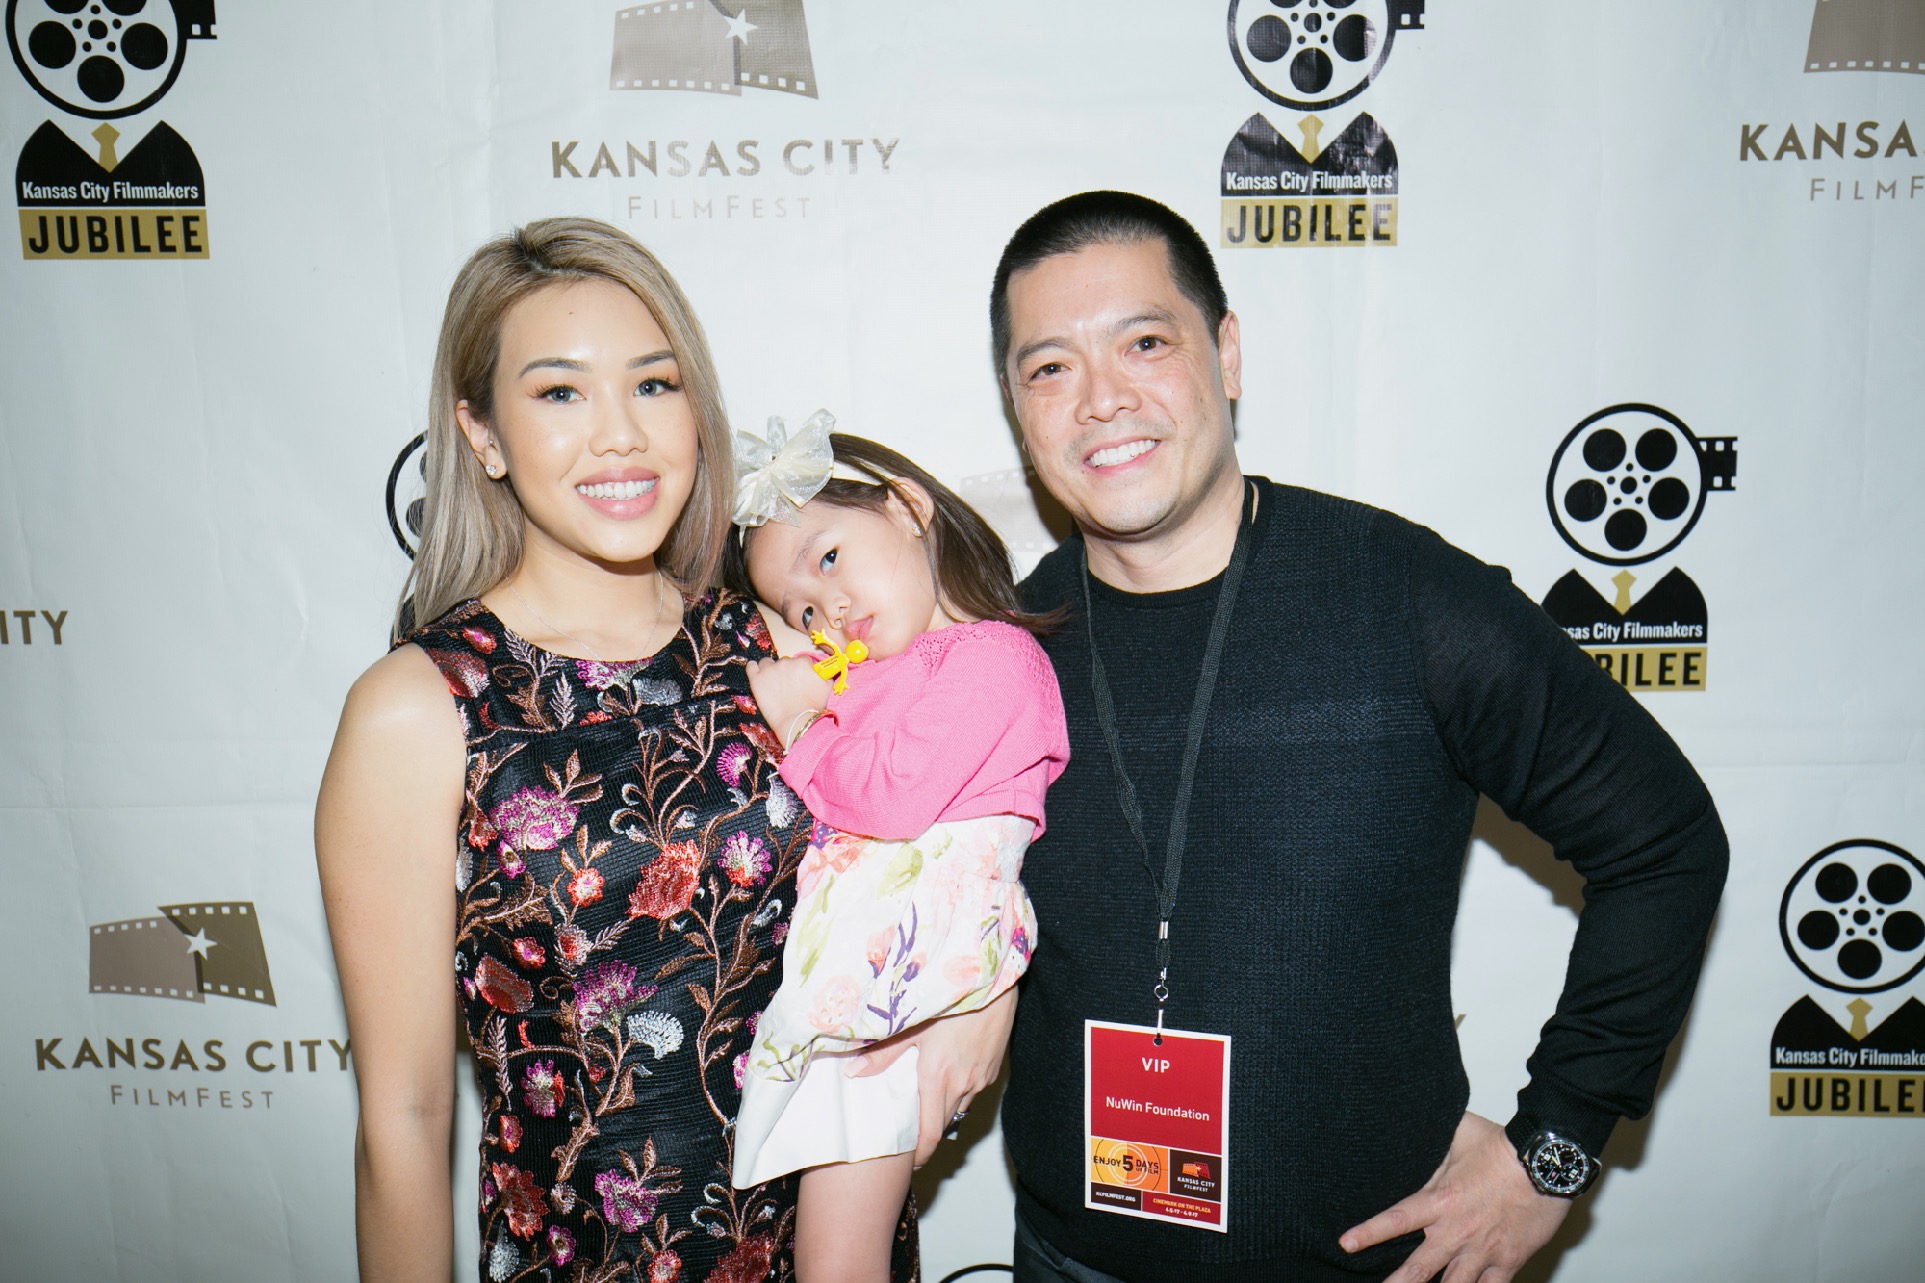 A couple with a cute baby girl at KC Film Fest